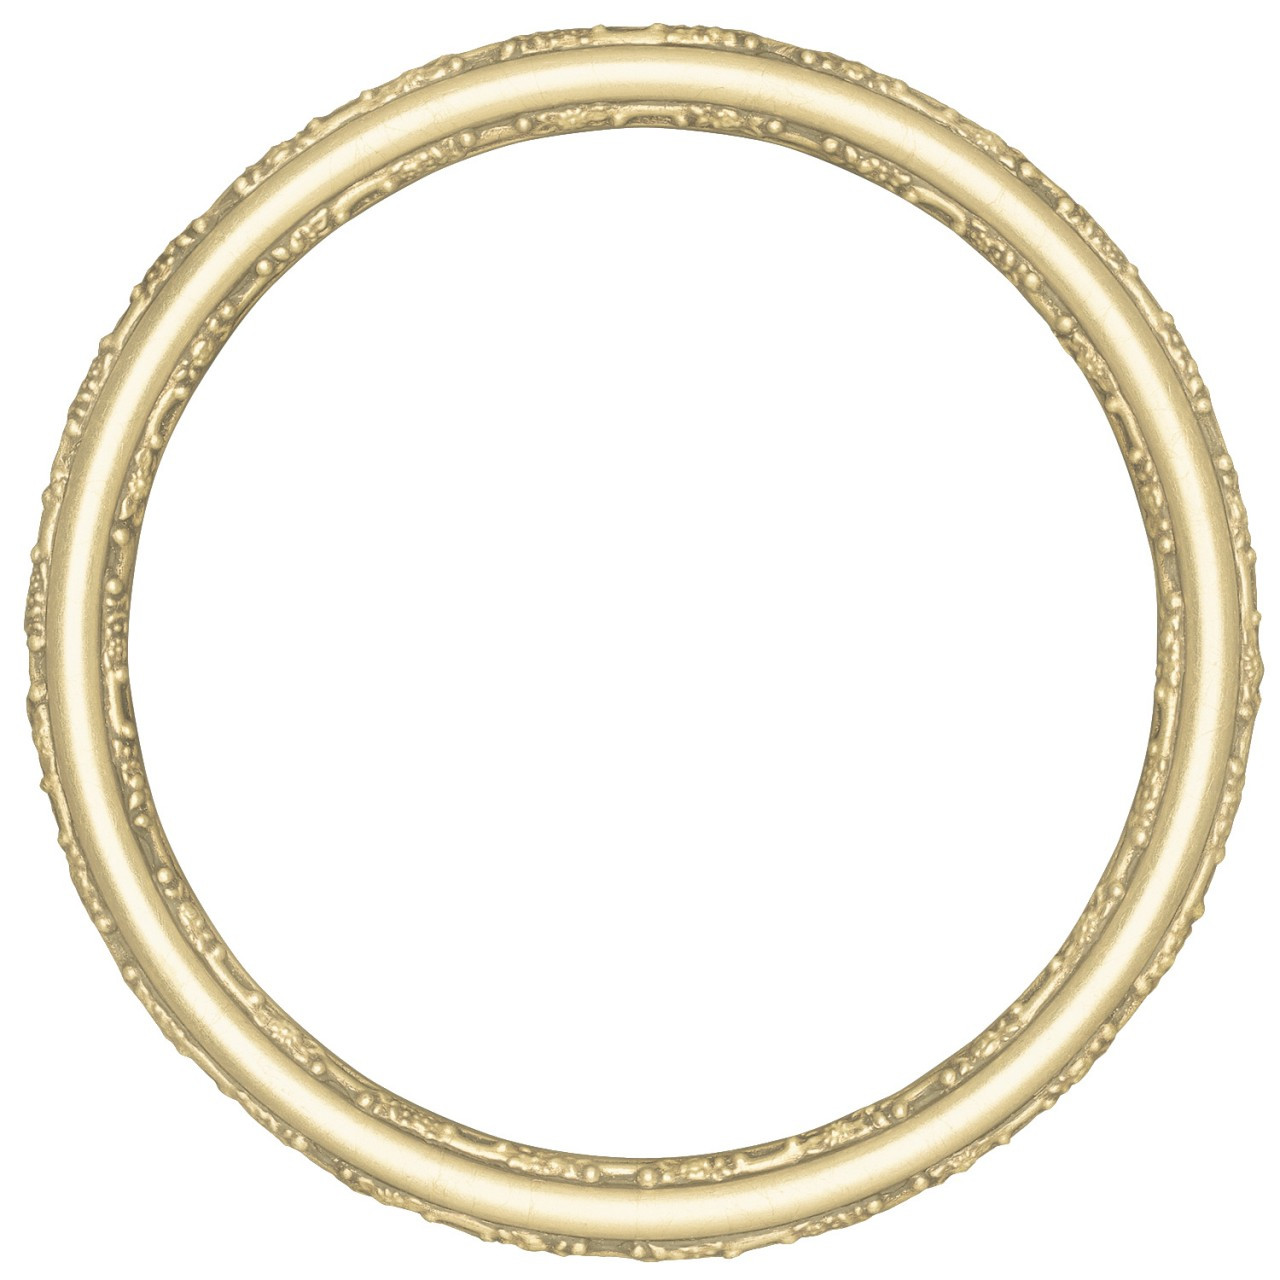 Round Frame in Gold Leaf Finish | Simple Antique Gold Picture Frames ...